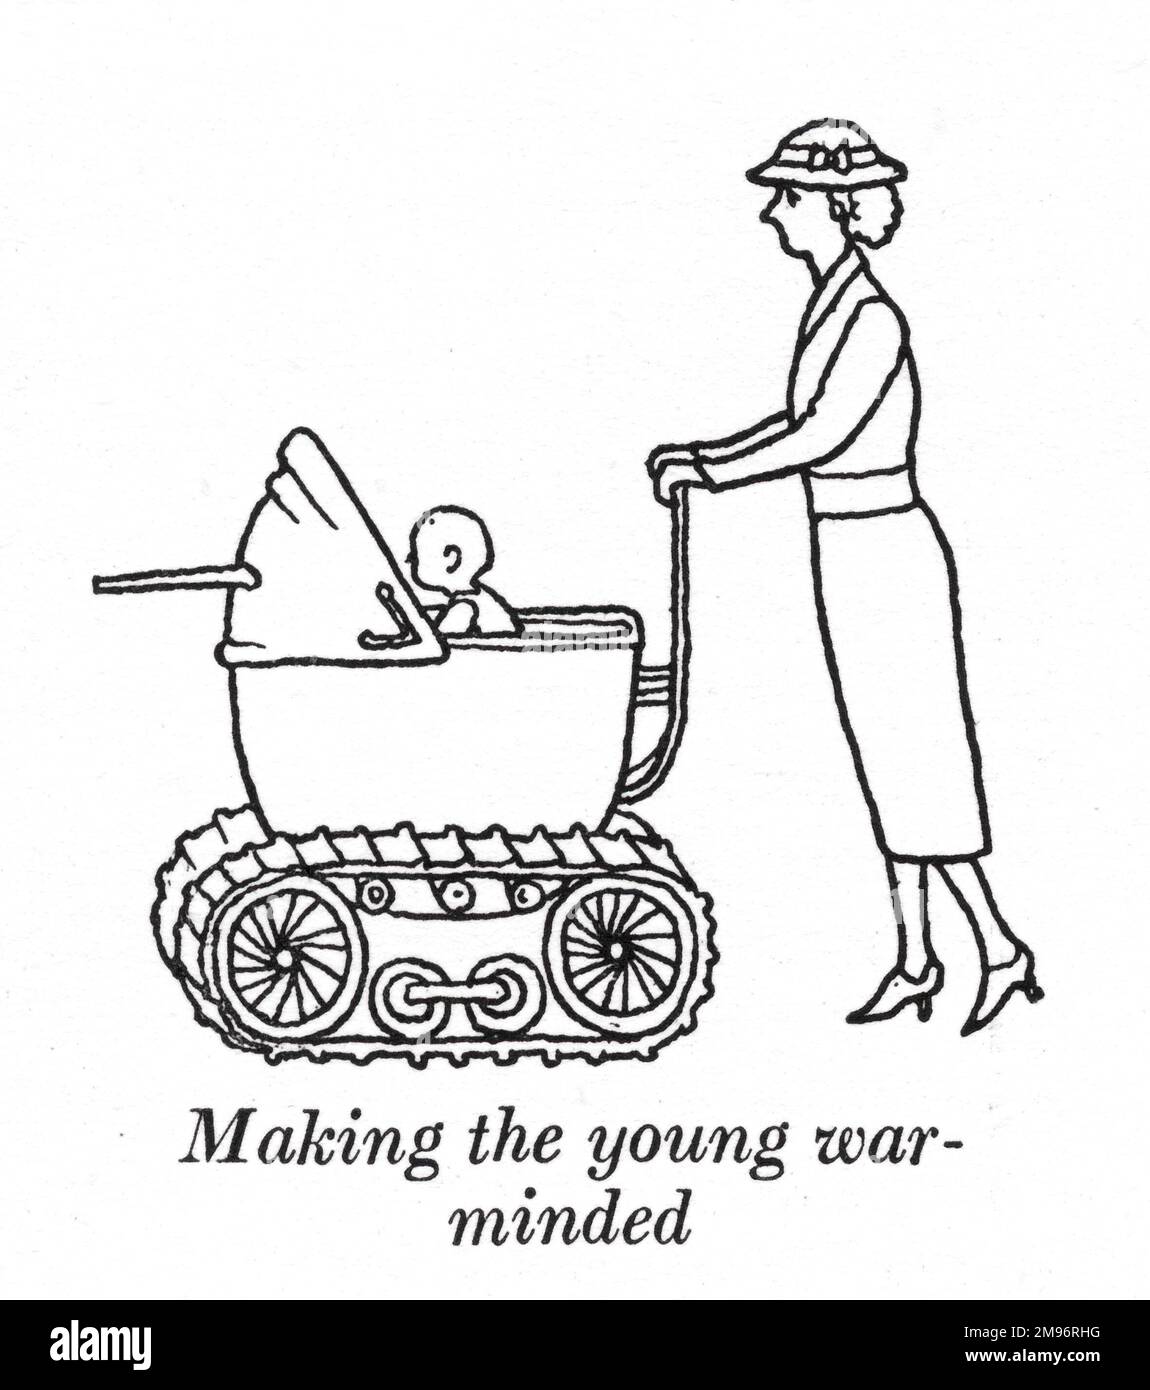 Heath Robinson - Wartime Cartoons - WWII.  Making the young war-minded. Stock Photo